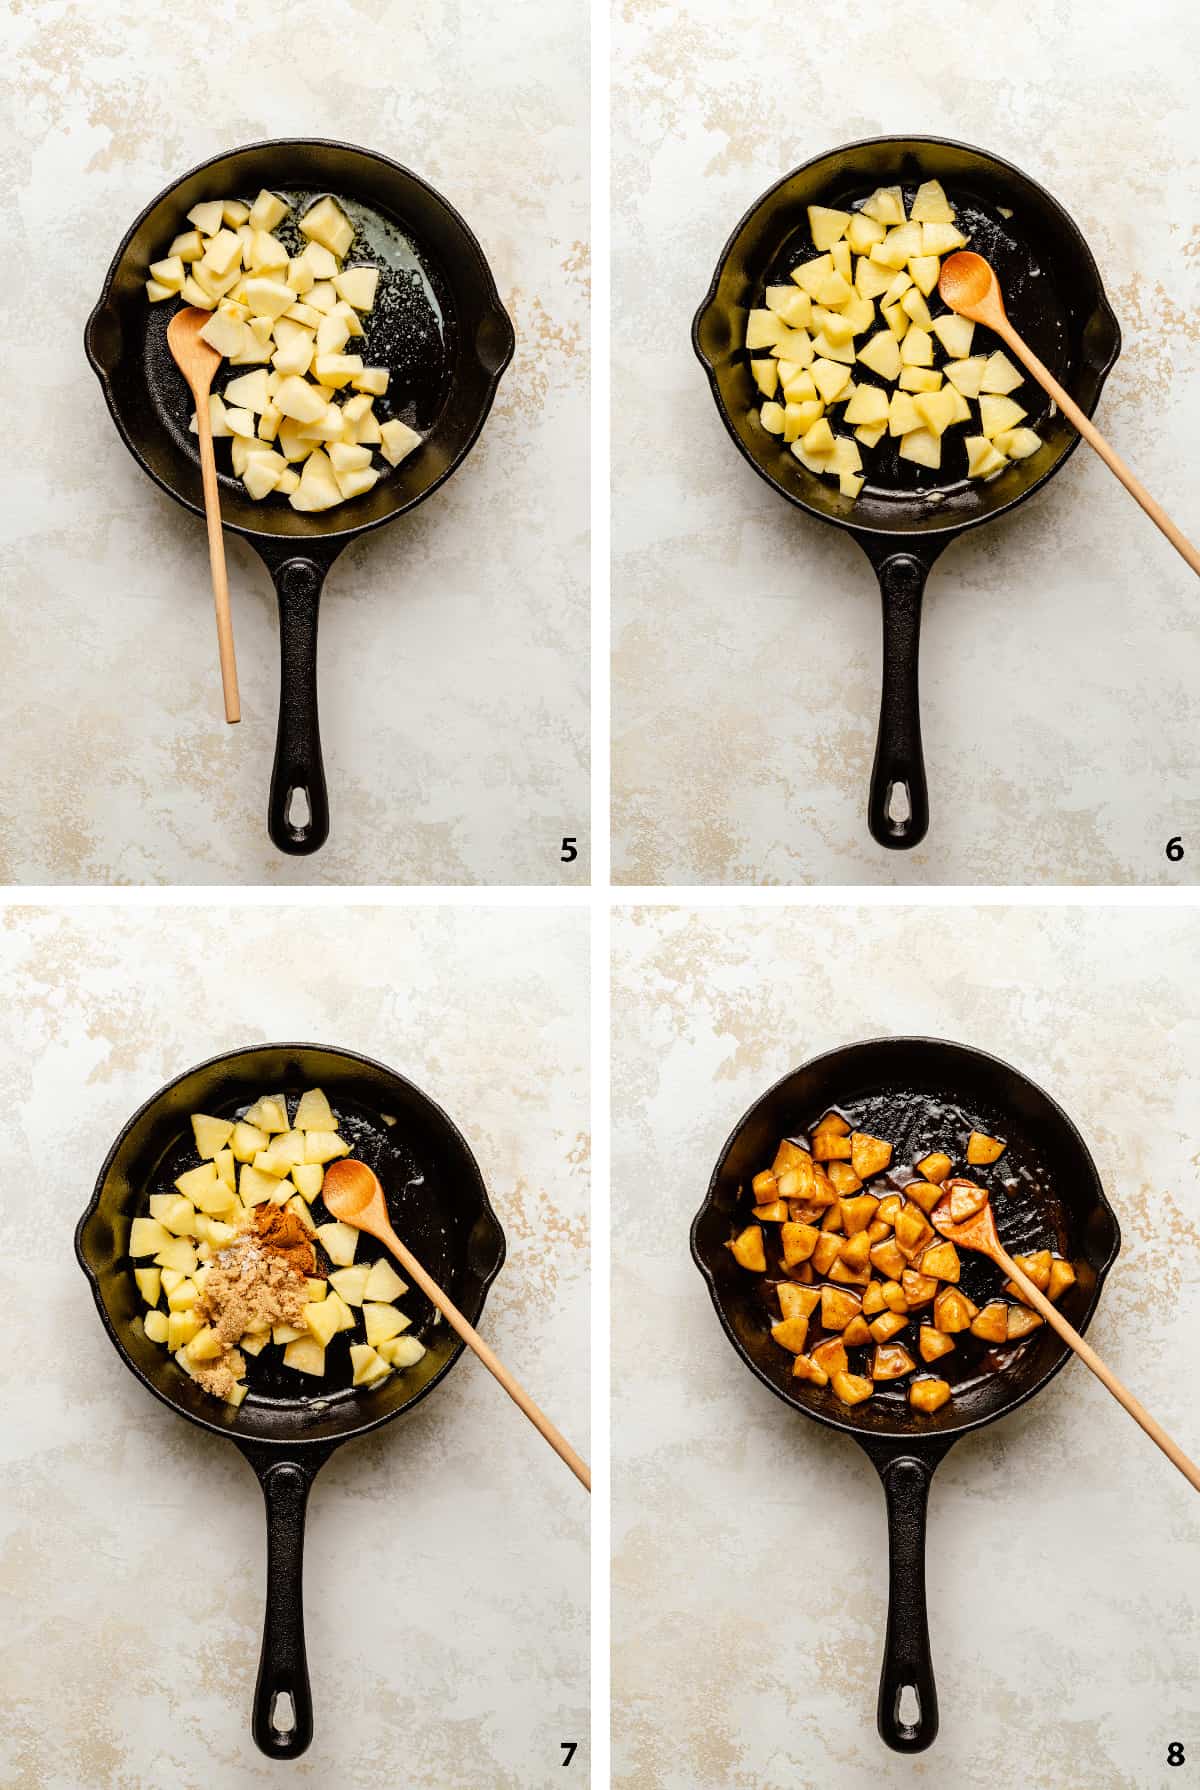 Process steps of making the apple cinnamon topping, sauteeing apples in butter, cooking in sugar and cinnamon. 